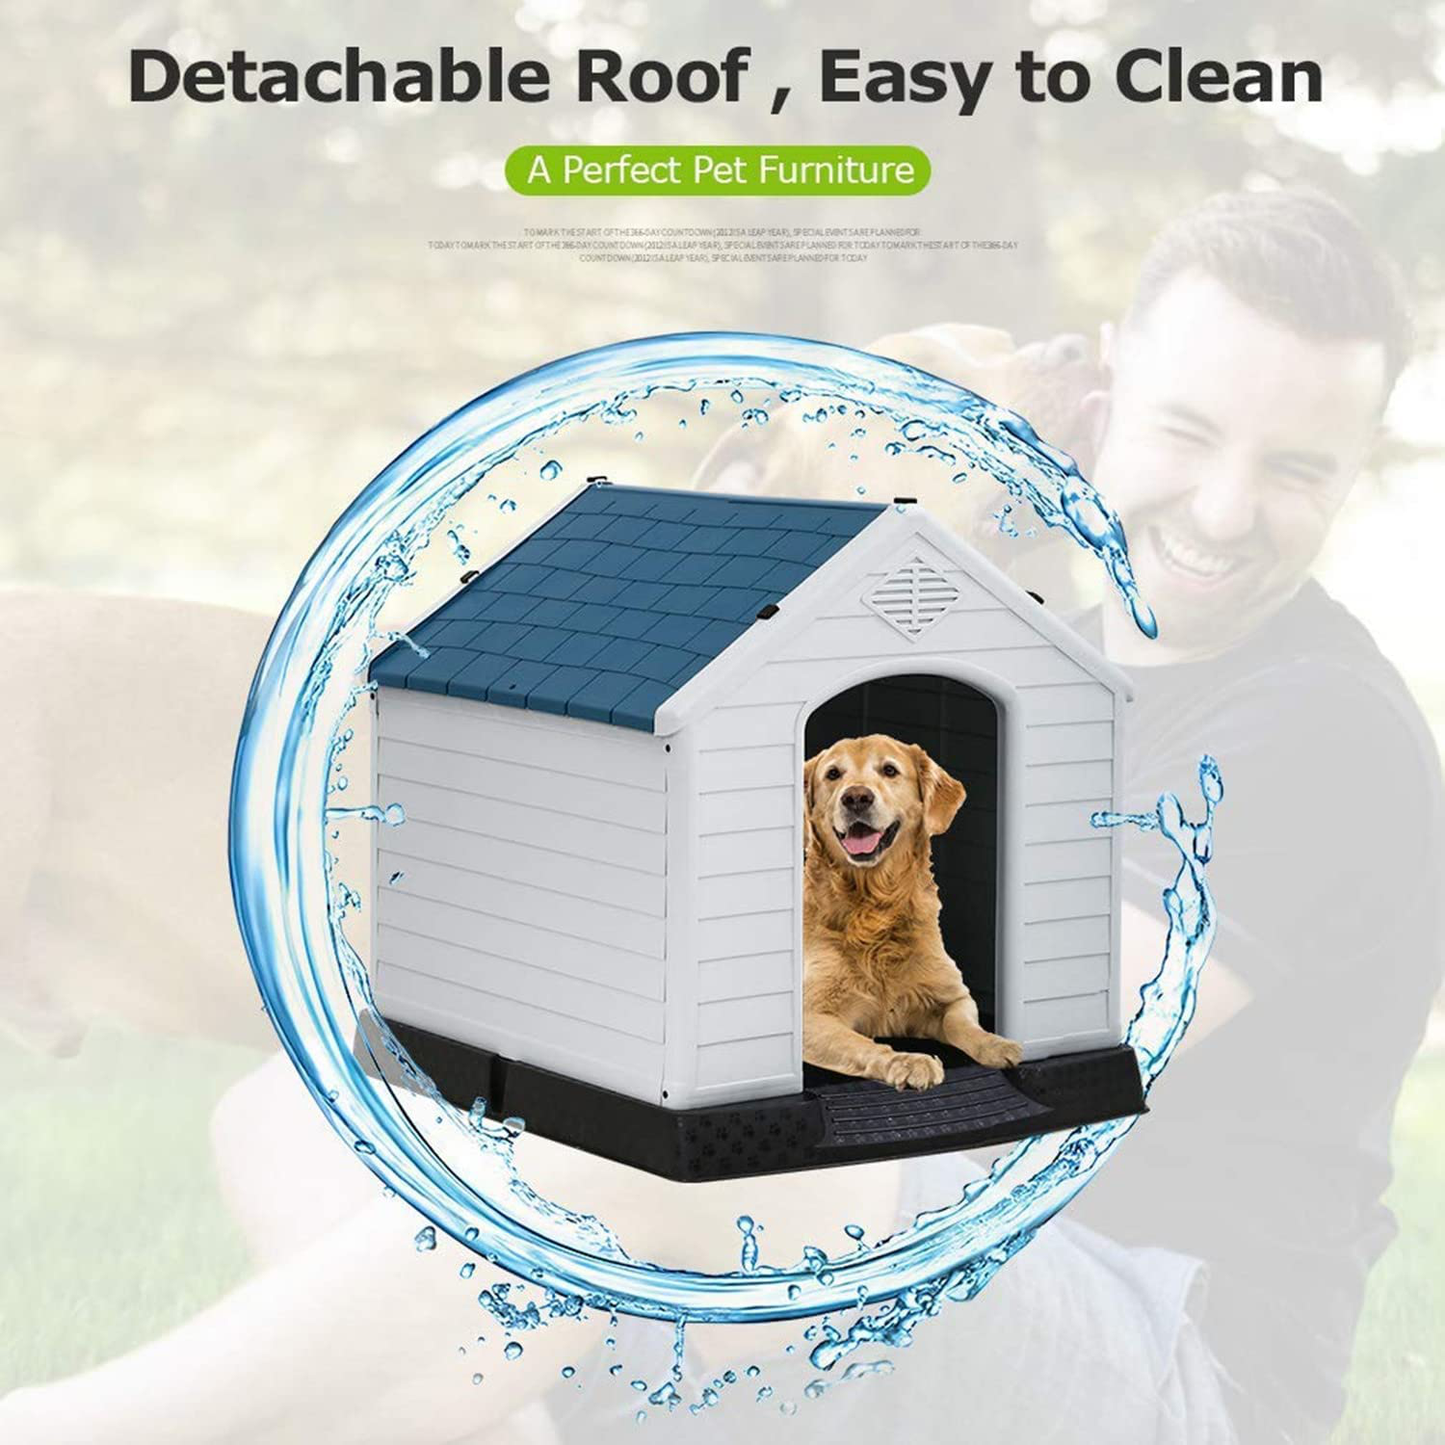 Large Dog House for Large Medium Dogs 32X30.5X34.5 Inches Plastic Water Resistant Dog Houses with Base Support for Winter Tough Durable House with Air Vents Elevated Floor Animals & Pet Supplies > Pet Supplies > Dog Supplies > Dog Houses FLL   